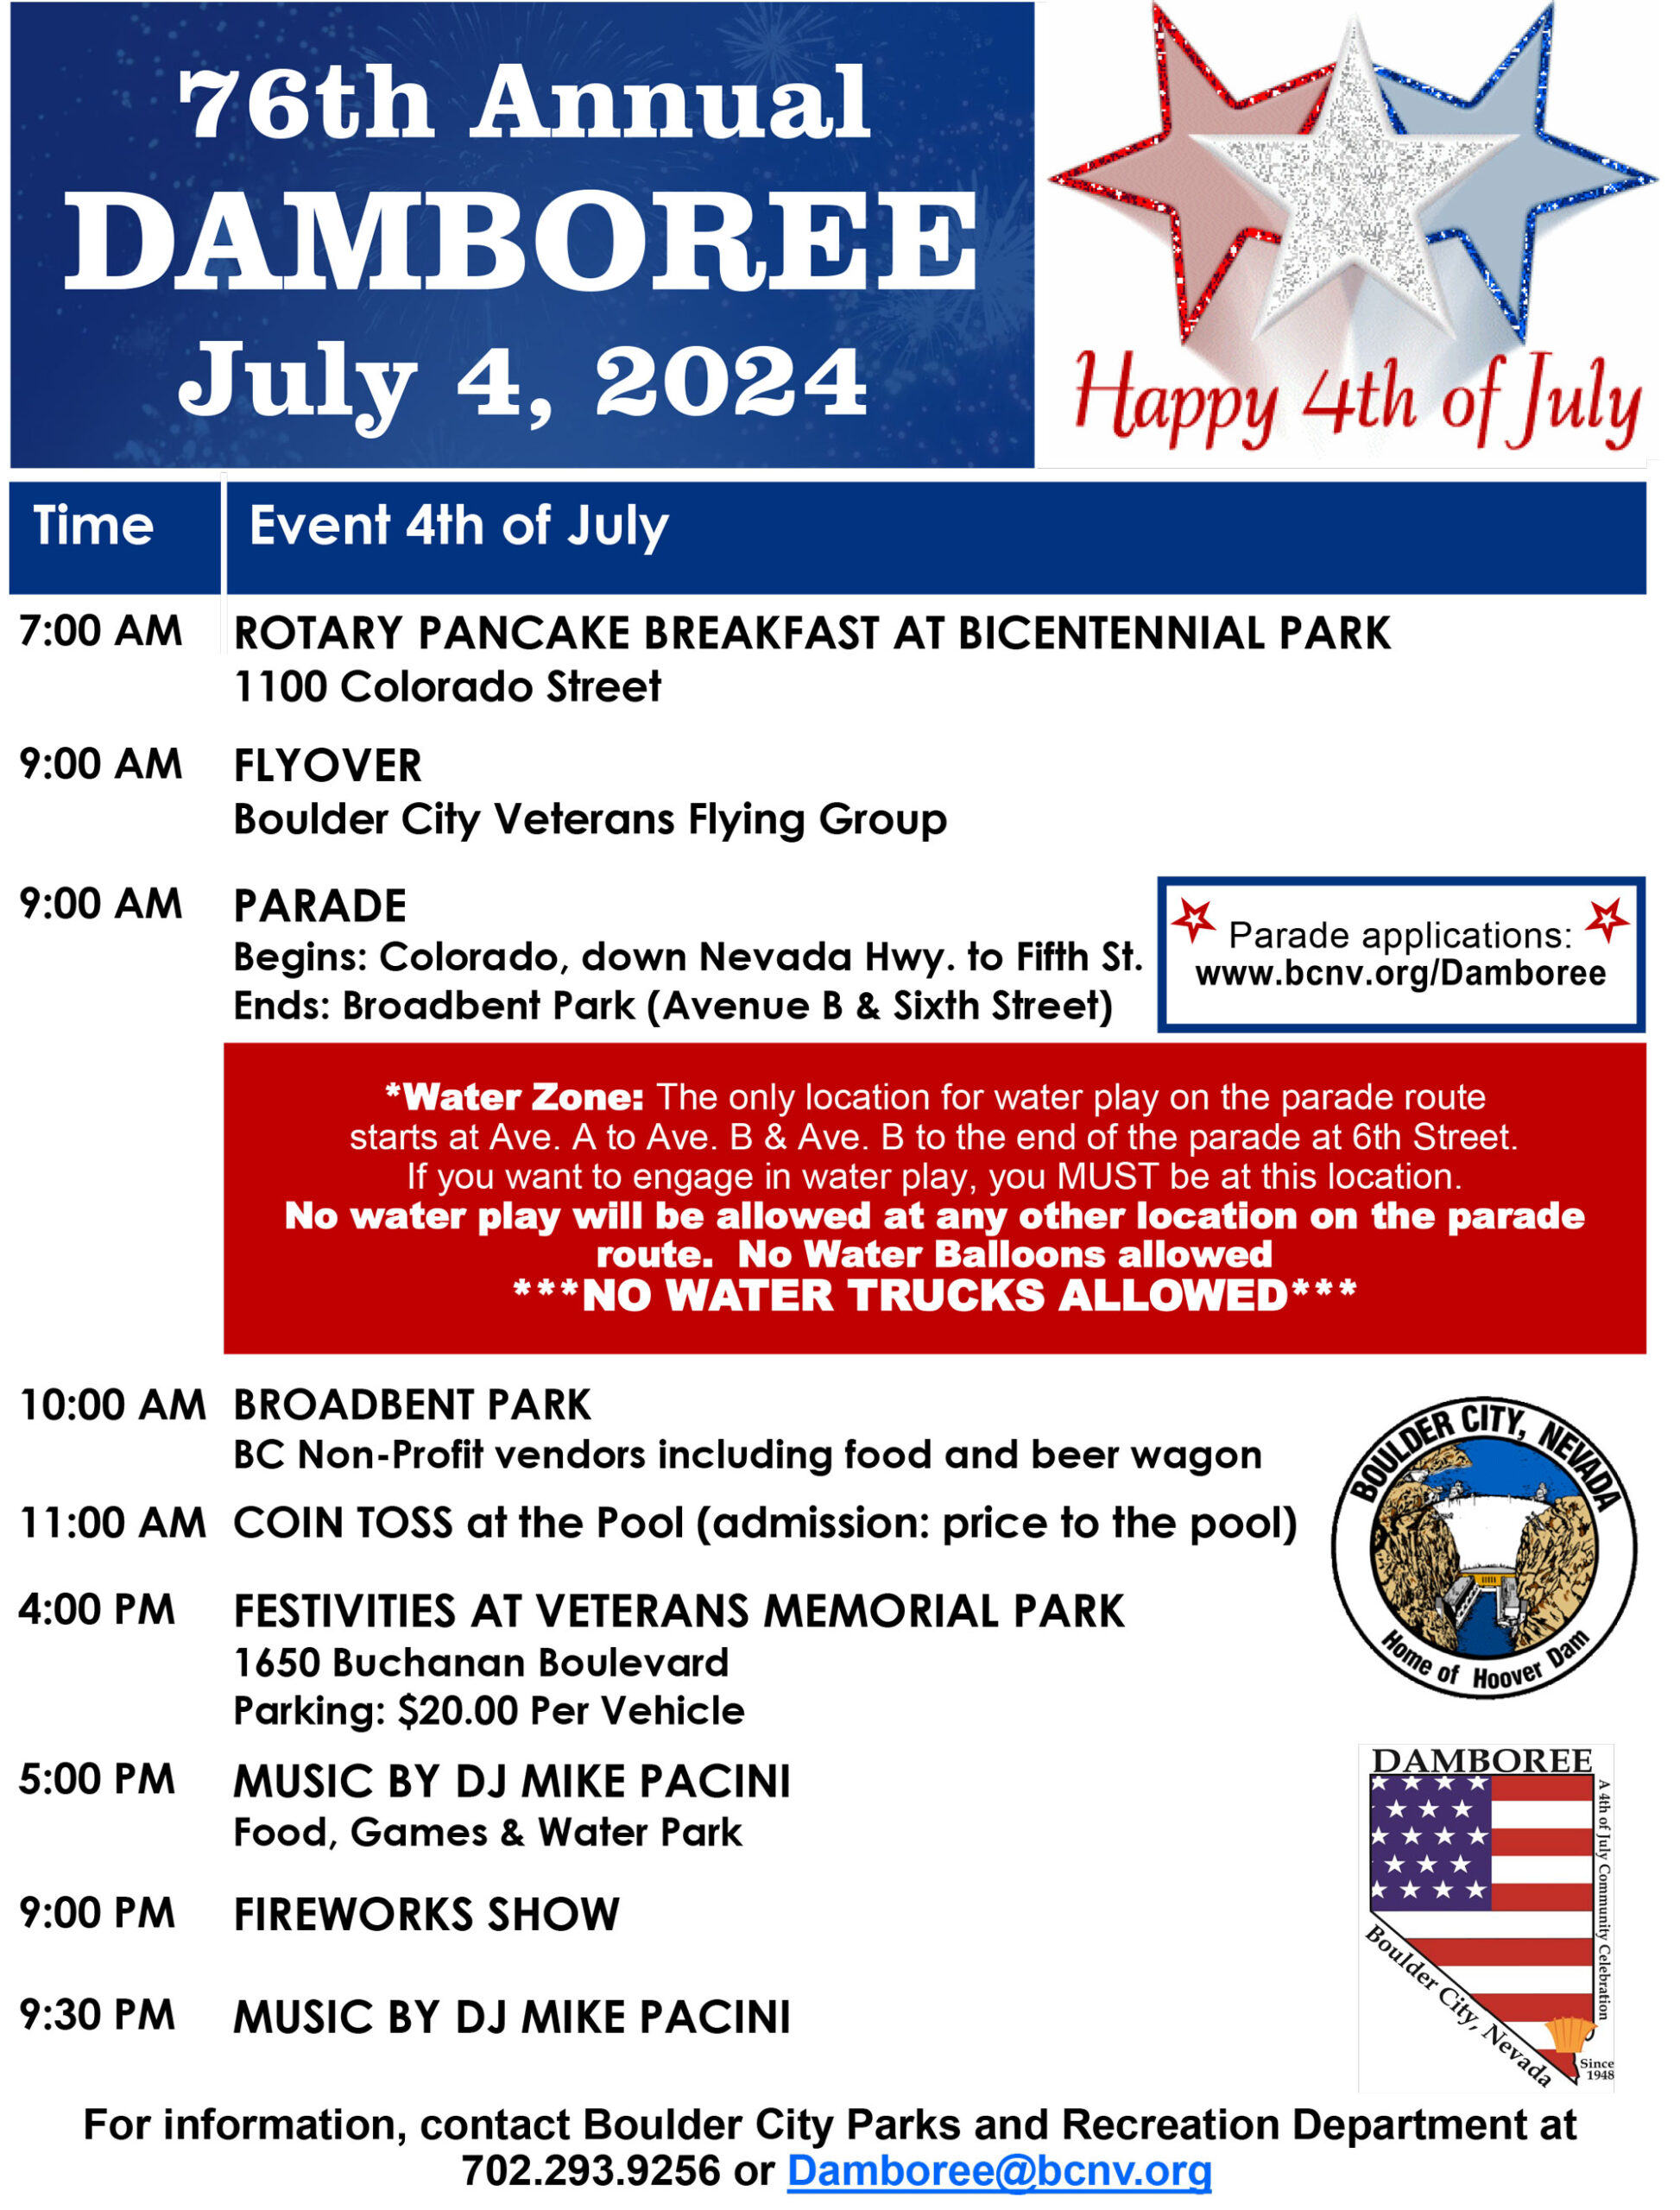 Starting with a pancake breakfast at 7 a.m., followed by a parade and an airshow. The afternoon features live music, food, games, and a splash park. The event ends with fireworks in the evening